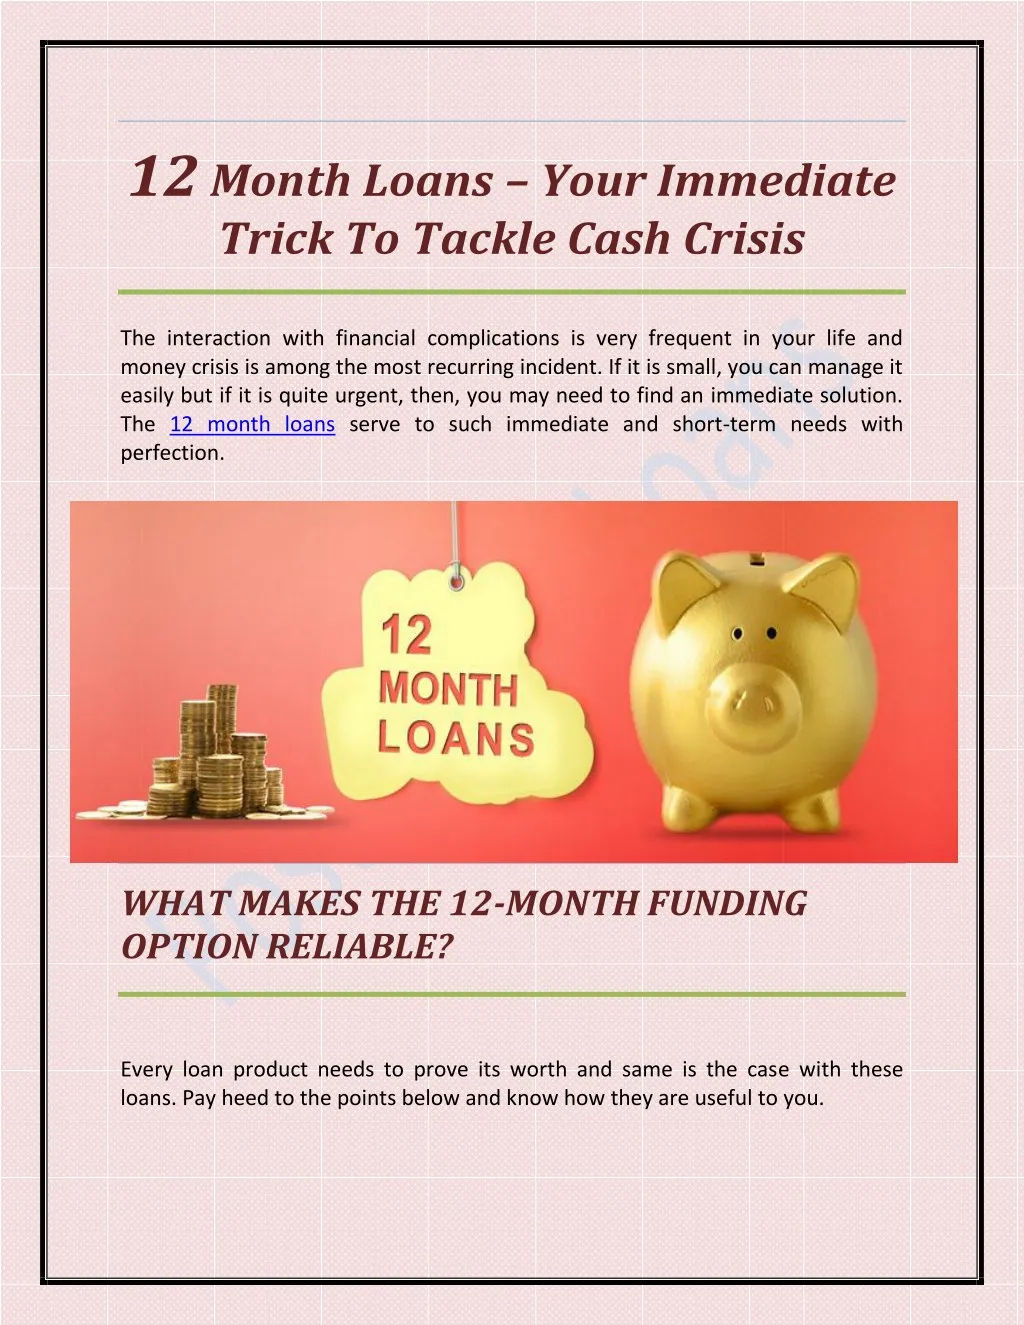 12 month loans your immediate trick to tackle